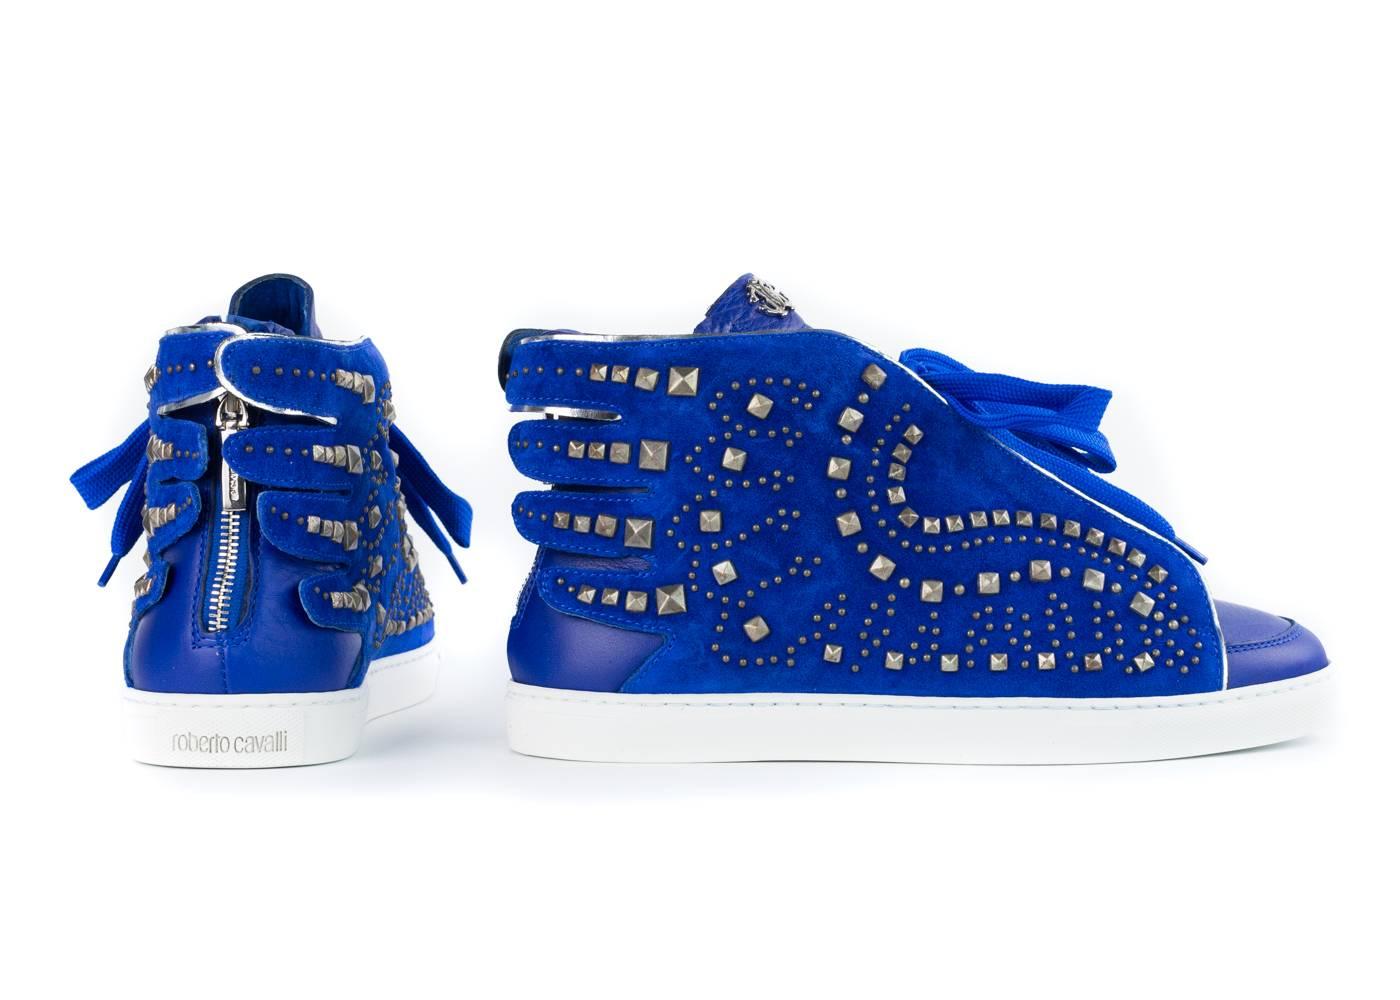 Roberto Cavalli Electric Blue Leather Studed Sneakers Shoes In New Condition For Sale In Brooklyn, NY